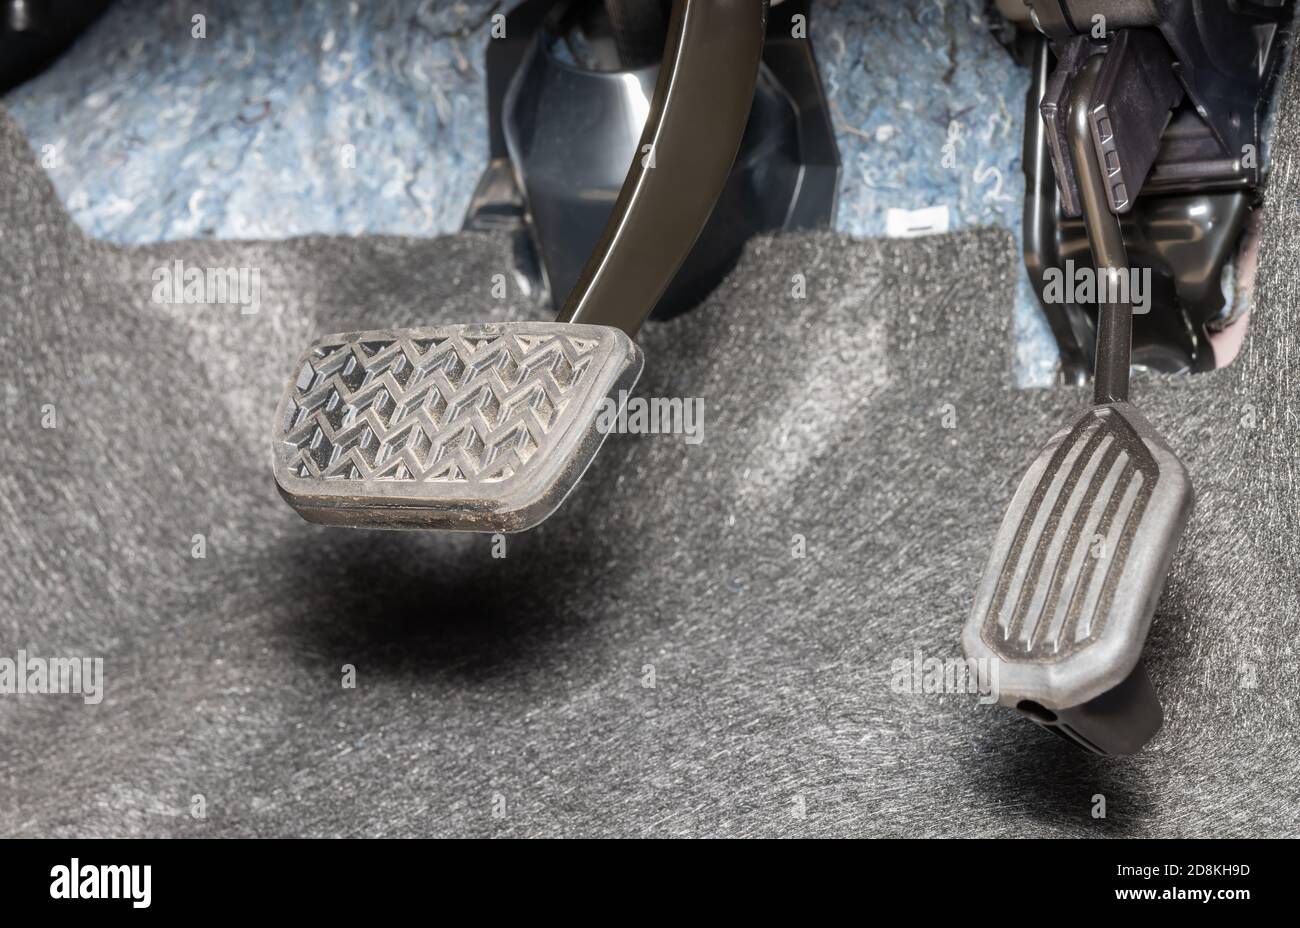 Brake Pedal and Accelerator Pedal of Car in Zoom View Stock Photo - Alamy